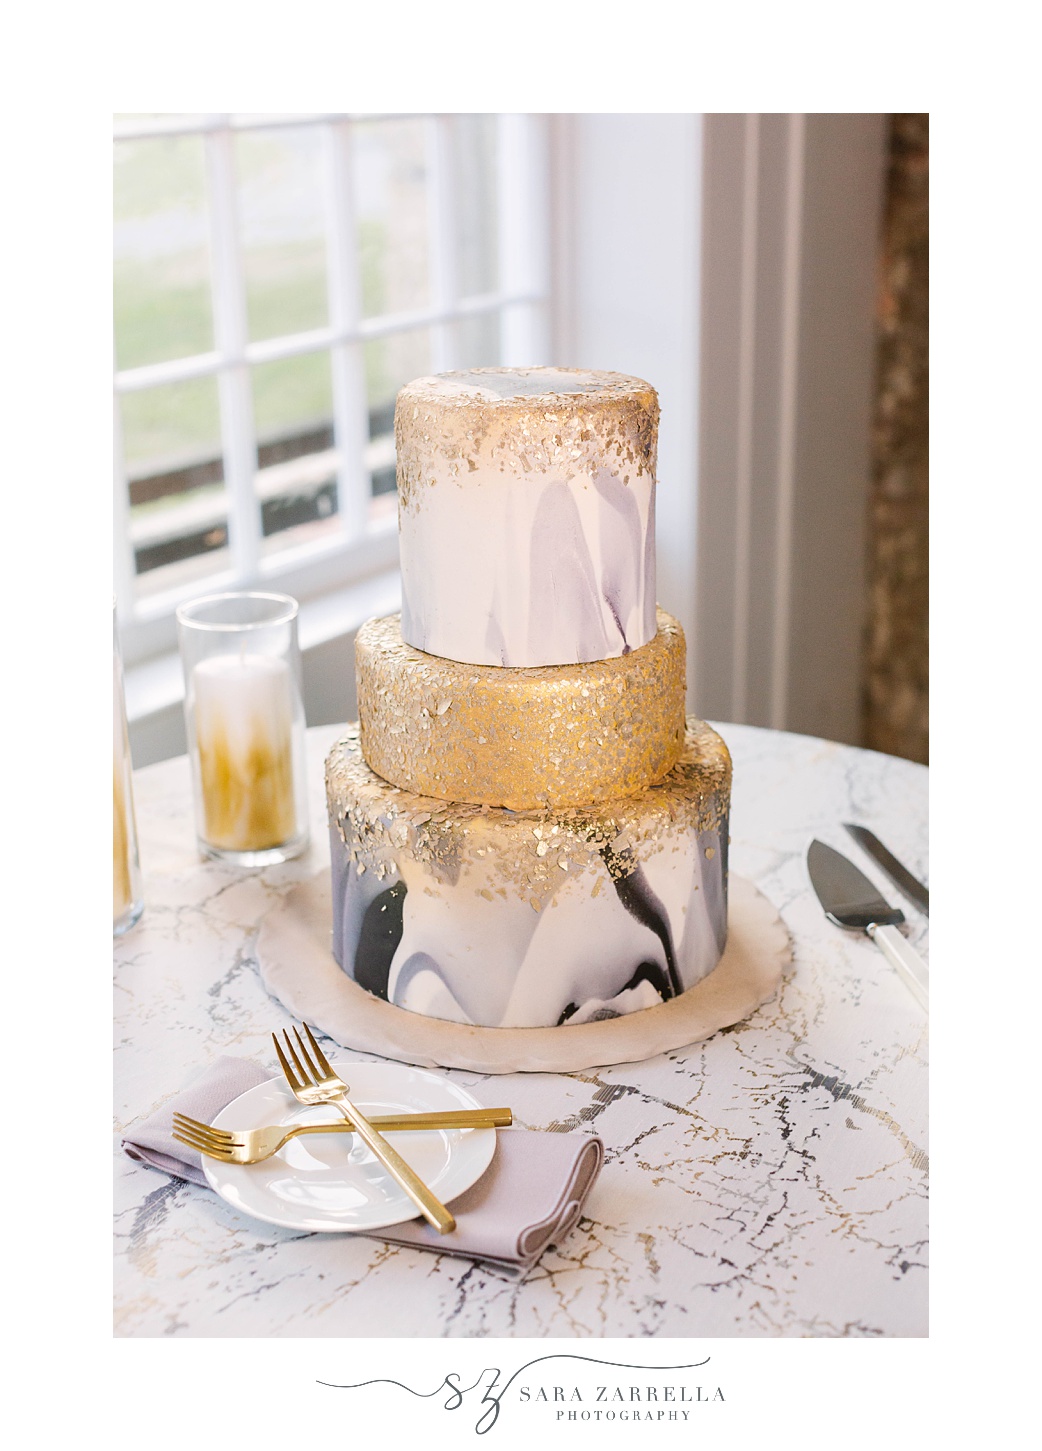 tiered wedding cake with gold details